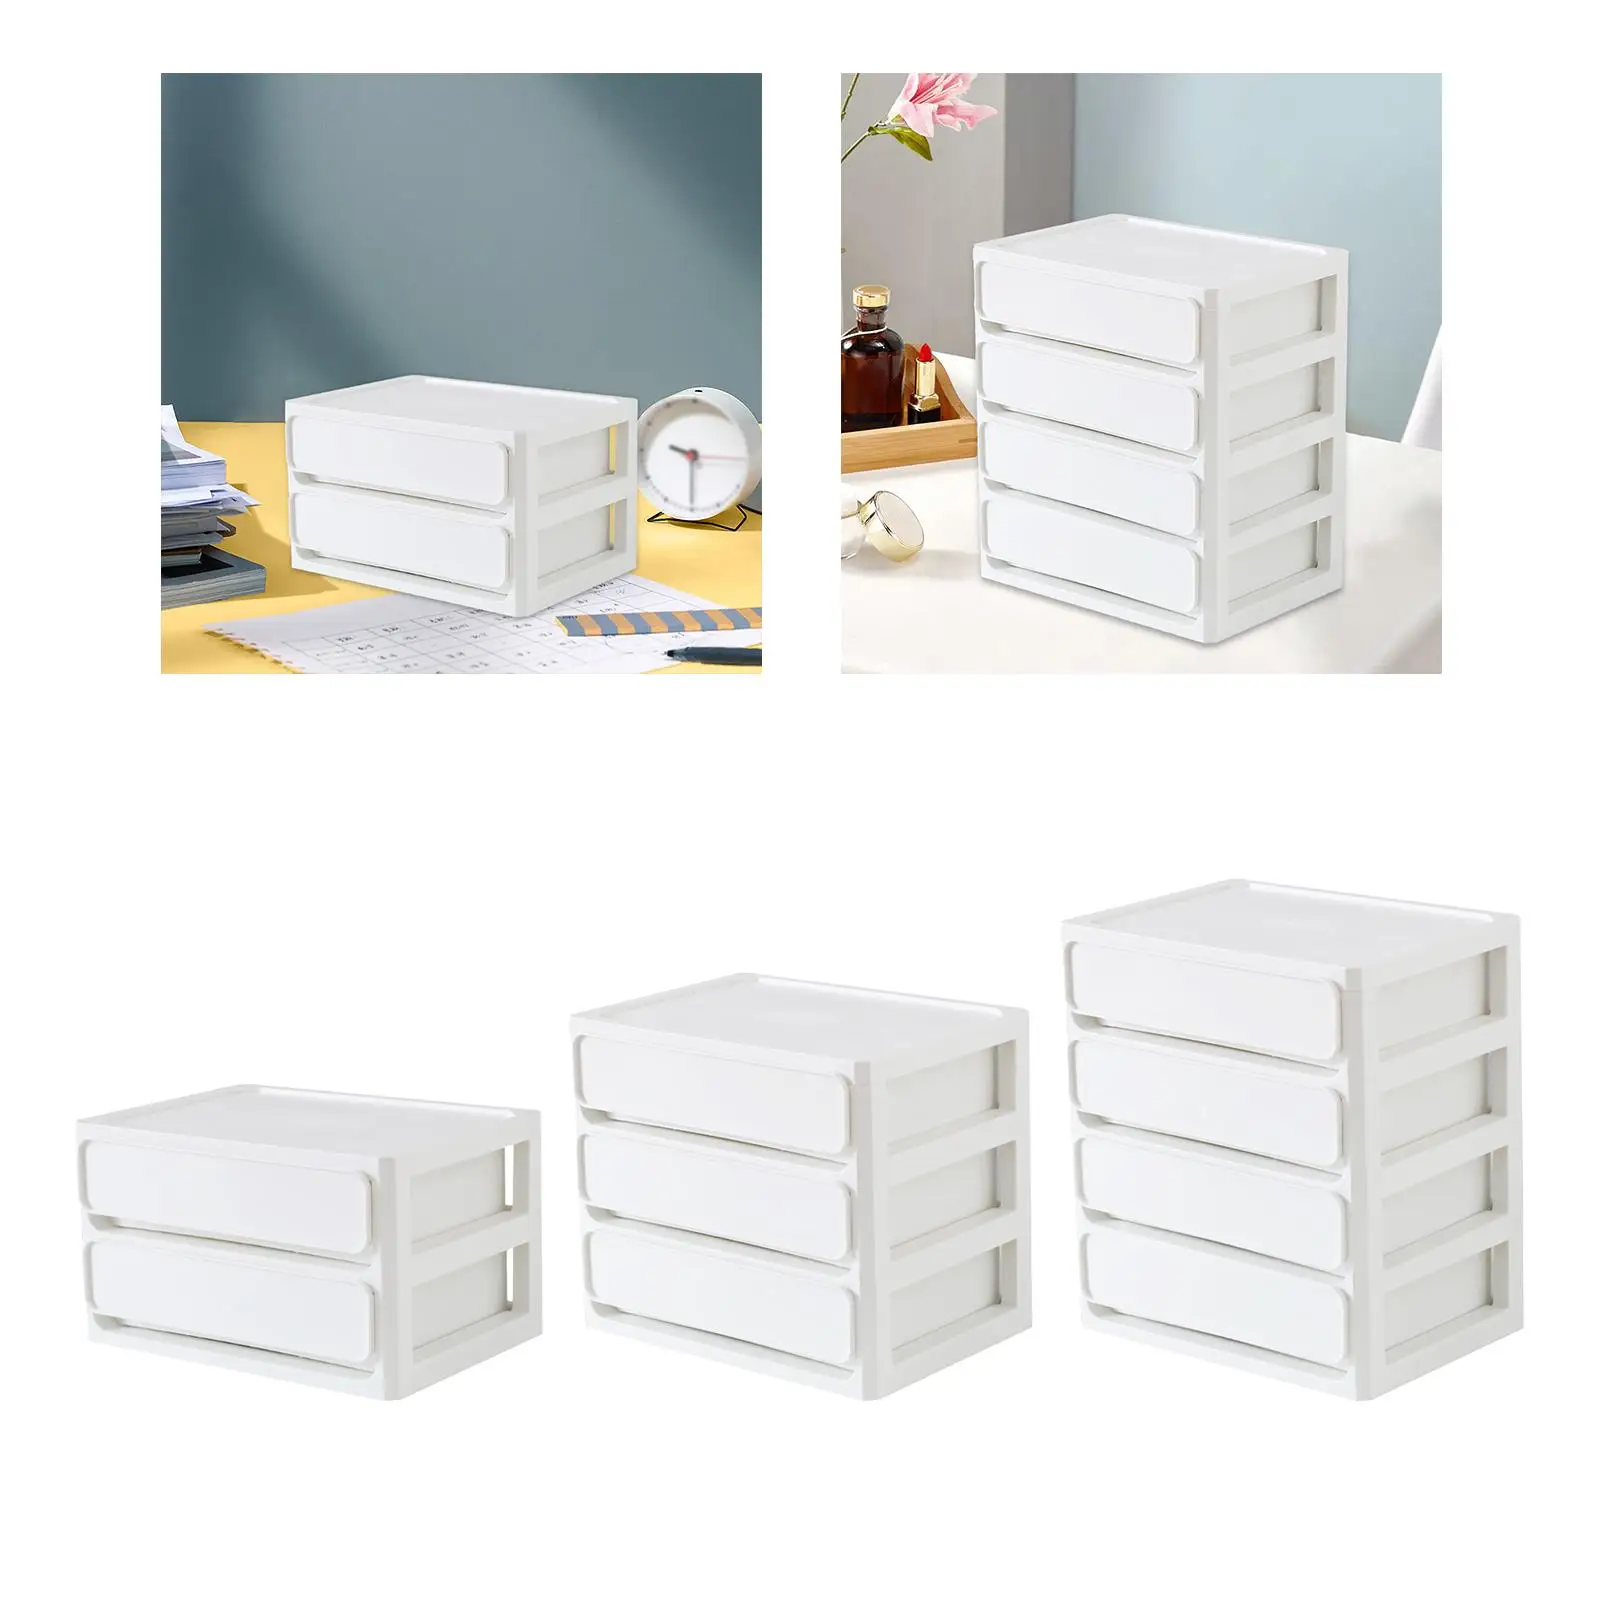 Desk Organizer Separated Stackable Multifunctional Portable Desk Cosmetic Storage Organizer for Sundries Tape Pen Office Pencils